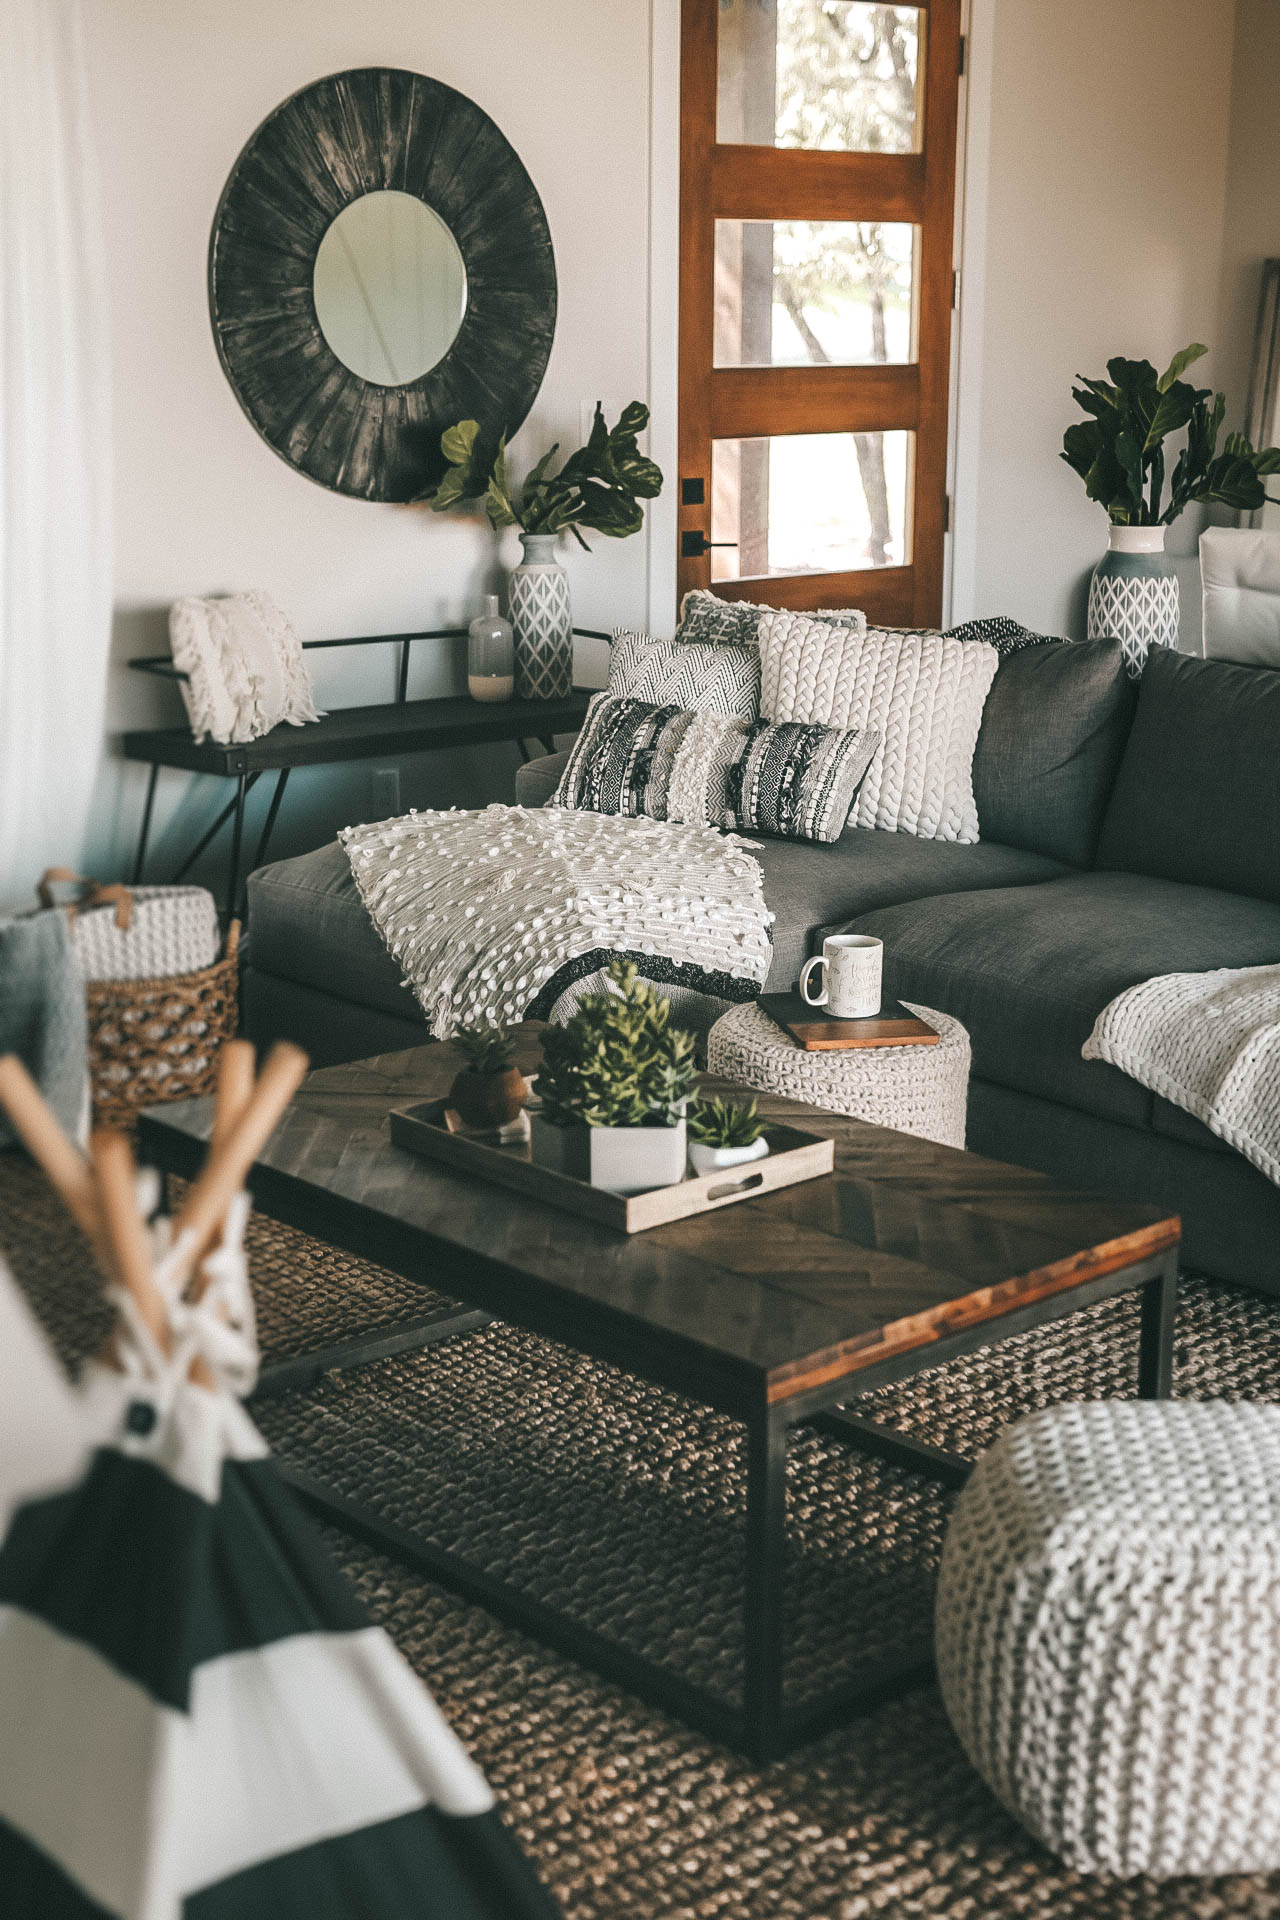 Nordstrom Home Decor Ideas Dressed to Kill